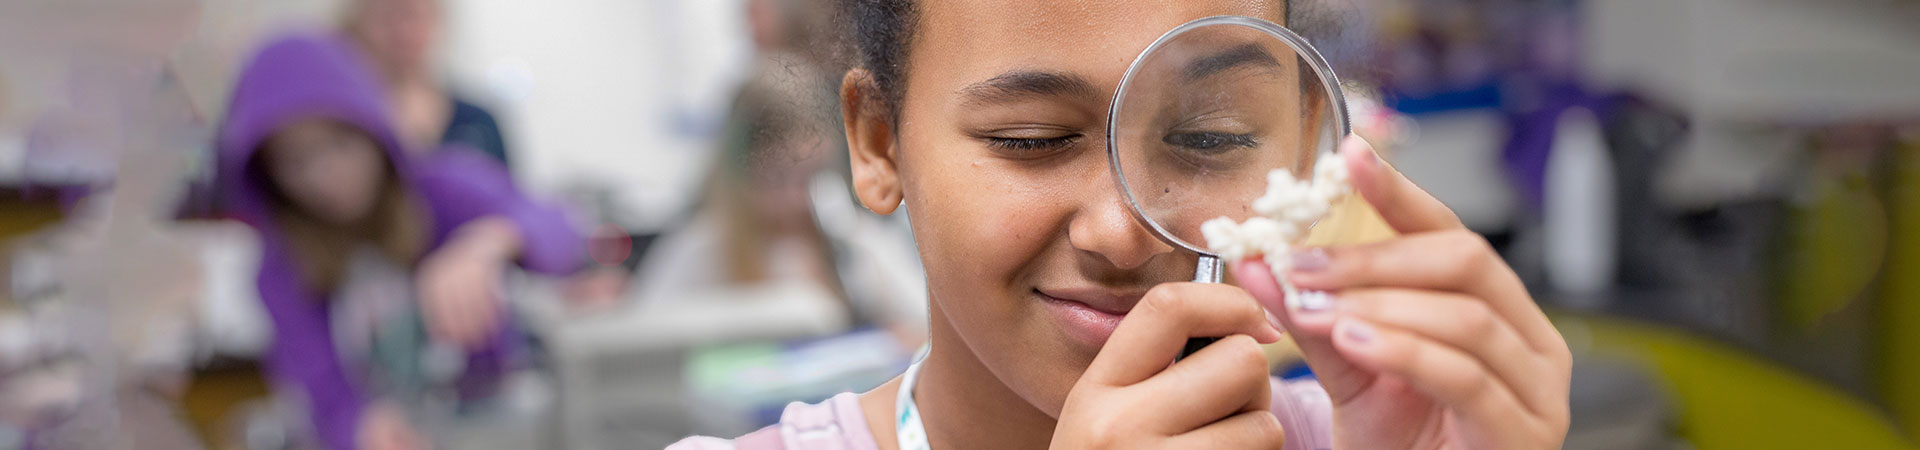  girl scout using a magnifying glass at an event  